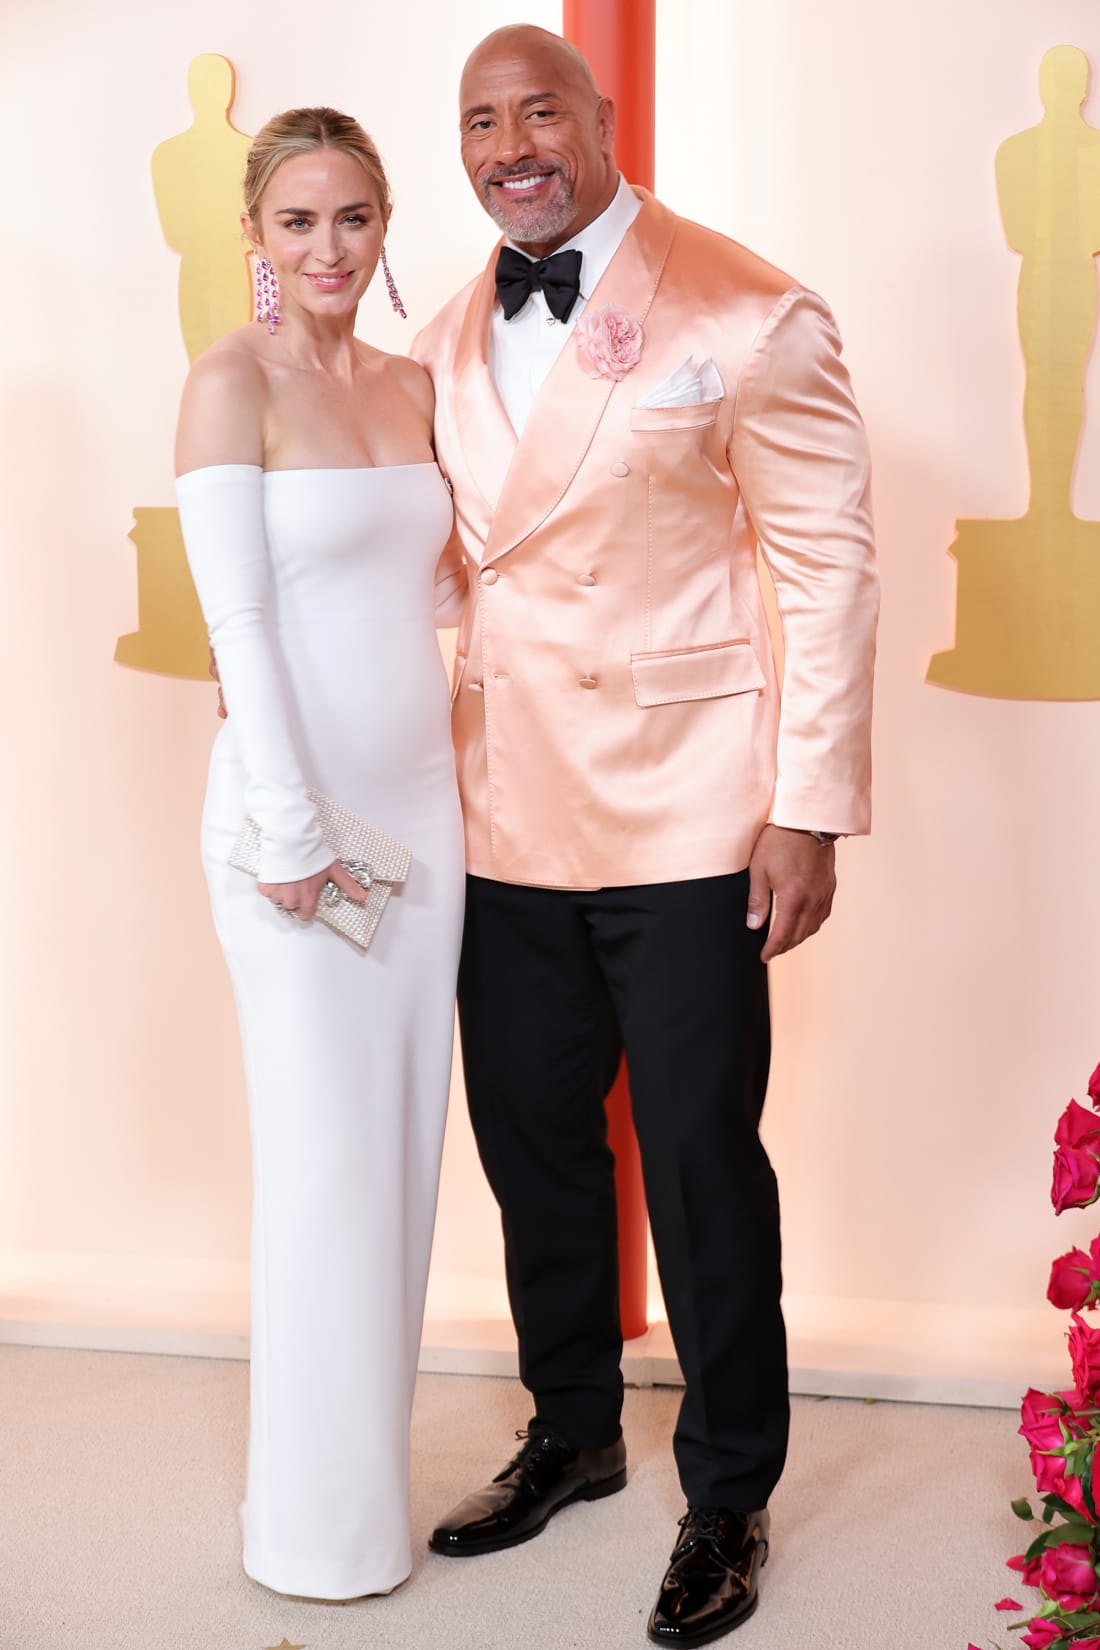 Emily Blunt was a sight in white, wearing an elegant Valentino gown while Dwayne Johnson shone in a ballet pink Dolce & Gabbana suit. 